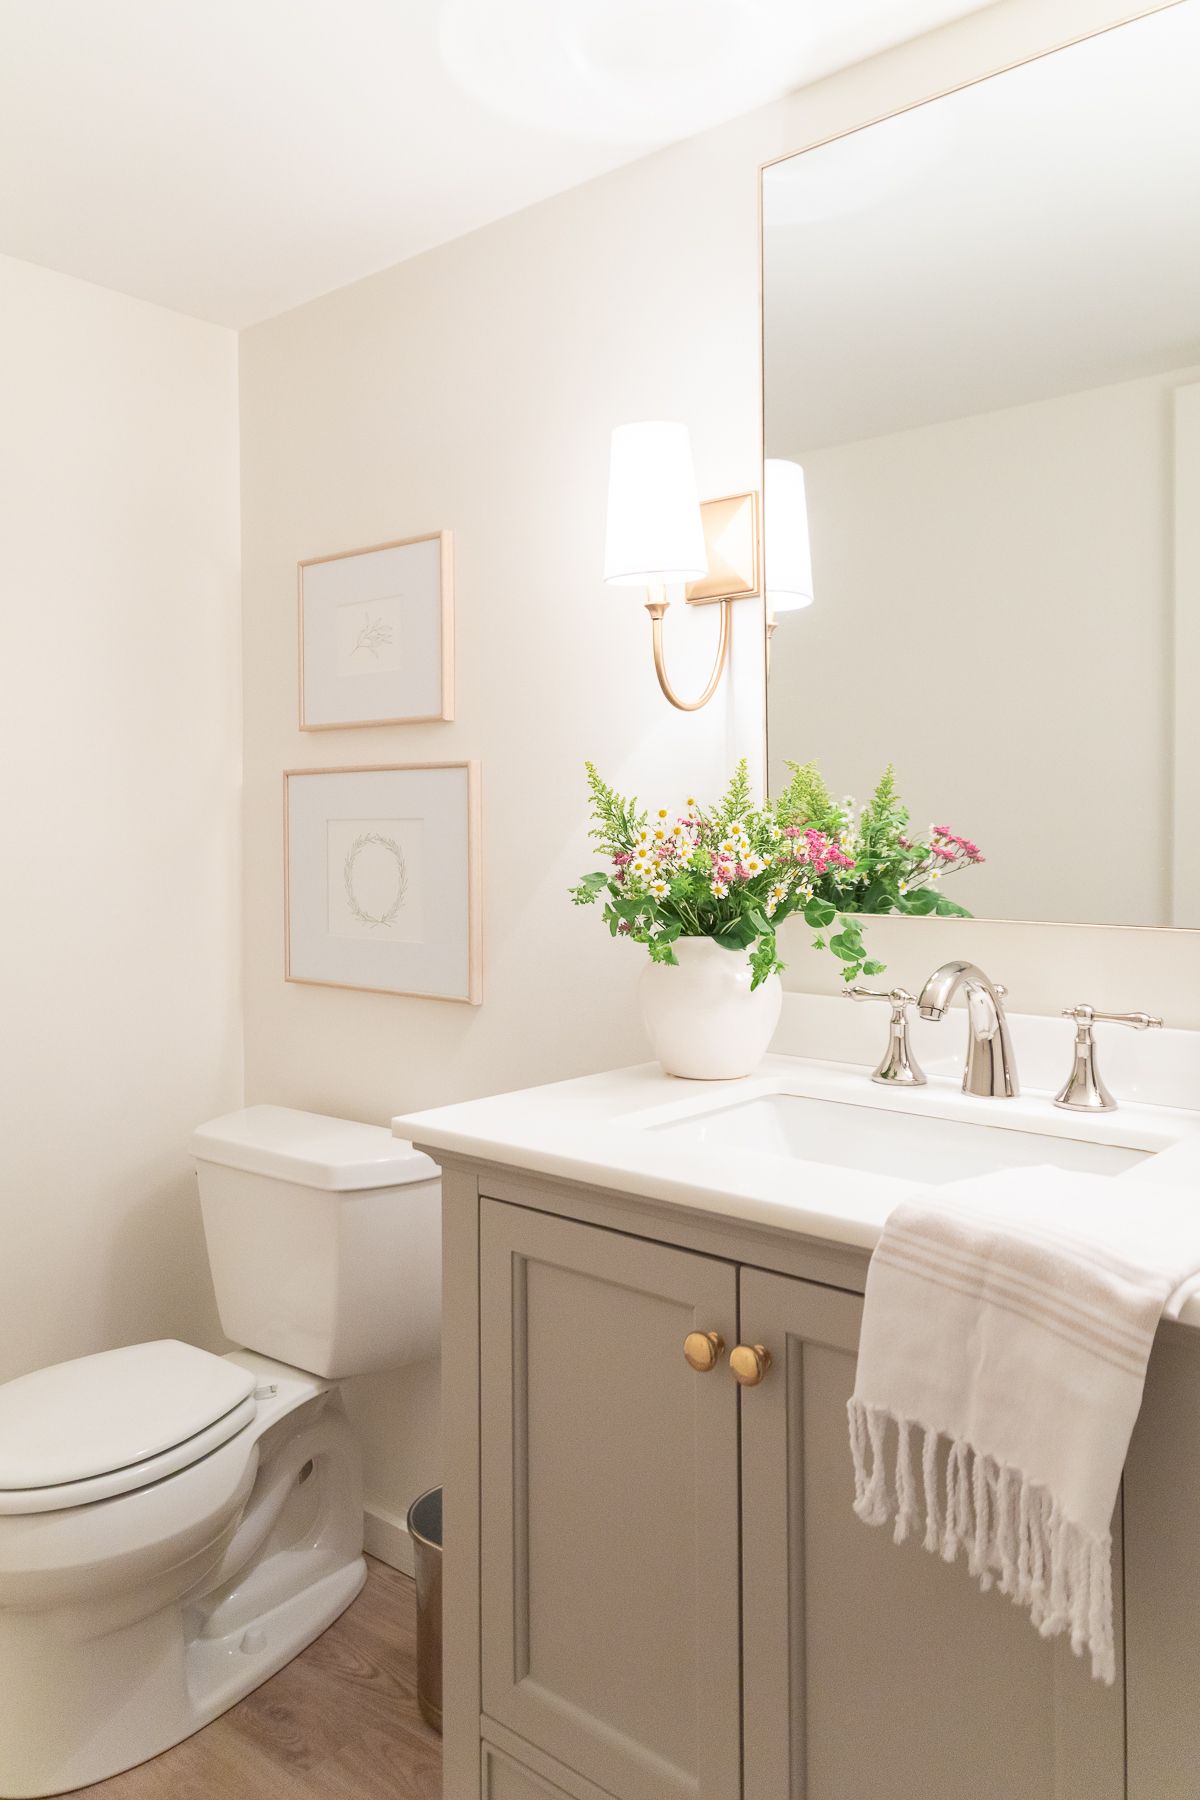 A bathroom with creamy walls and a greige vanity, with wall sconces for a cozy feel